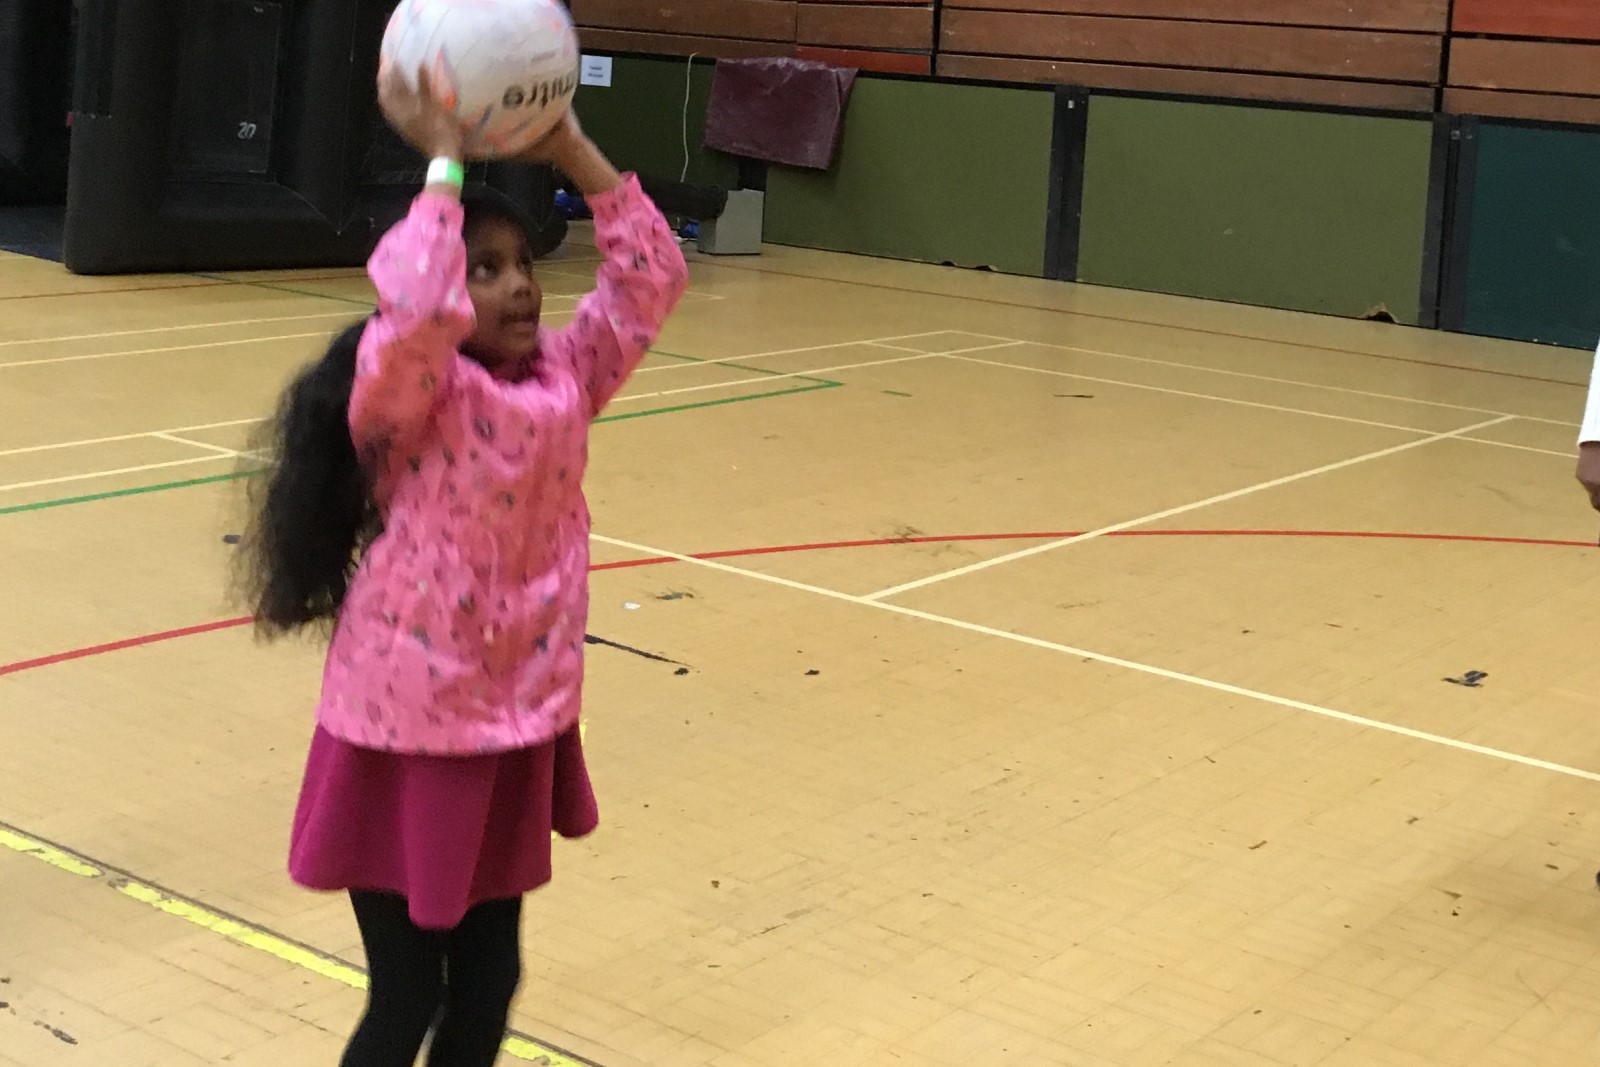 Girl in pink top holding netball above head.jpg